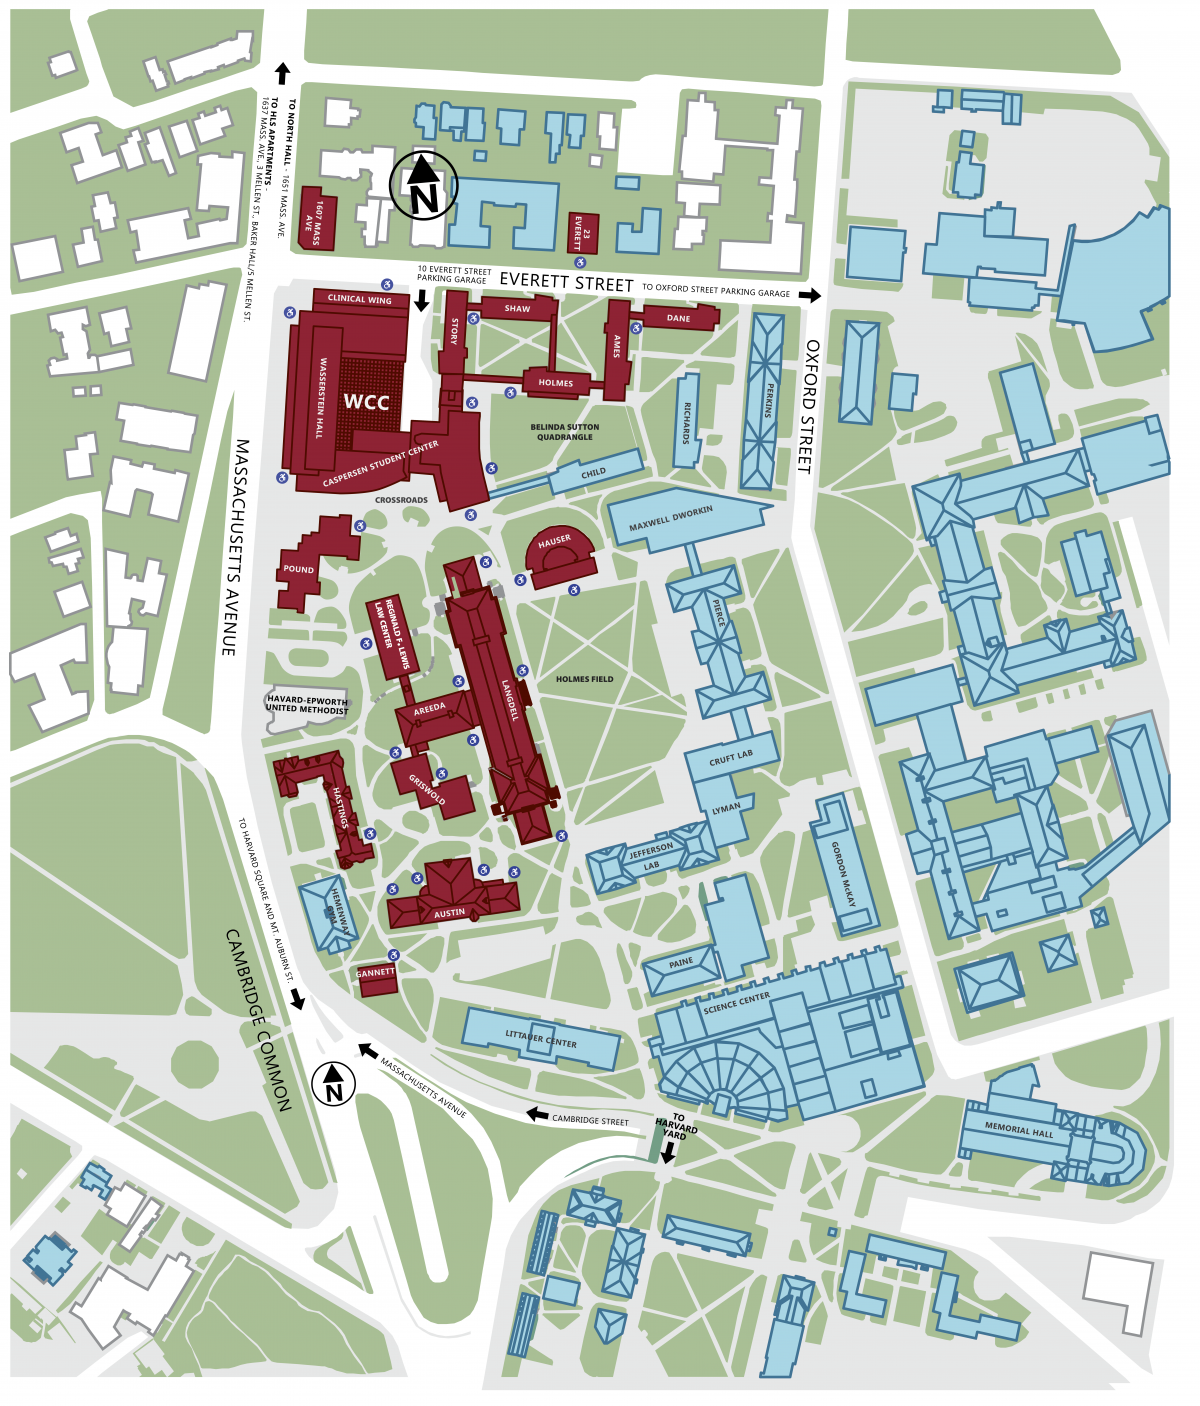 Campus Map Outline 04 24 22 01 1200x1406 1 